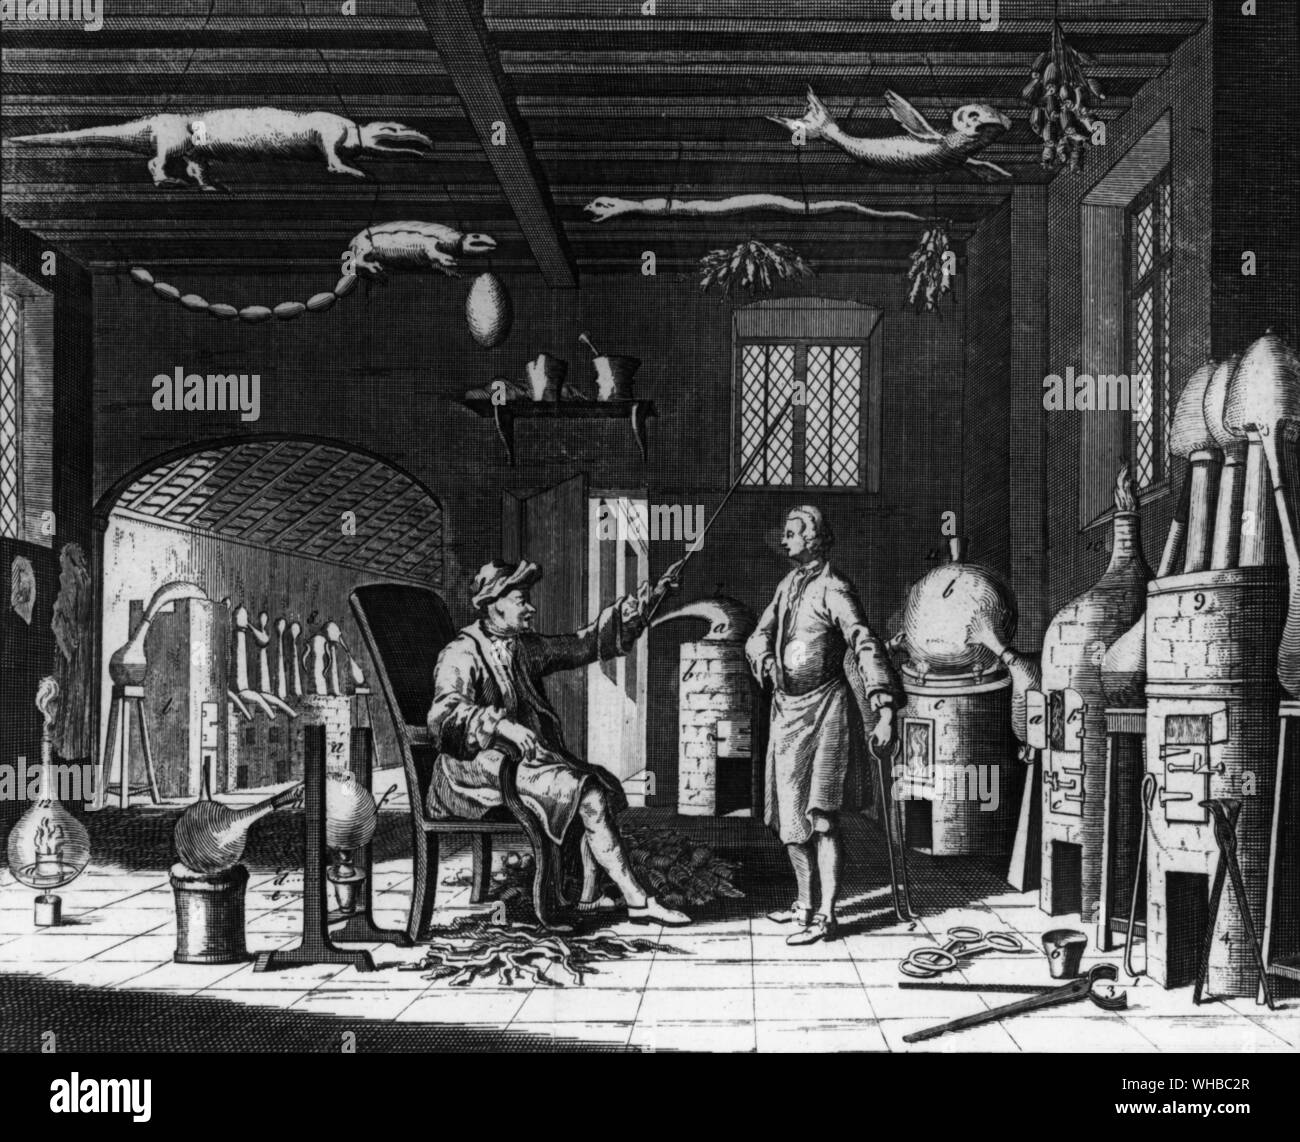 Chemistry Laboratory - . A second line of practical chemistry begun in the Universal Magazine in December 1747.. Designed Klincard for the Universal Magazine 1740 for I. Hinton at the Kings Arms in St. Paul's Church yard, London.. Stock Photo